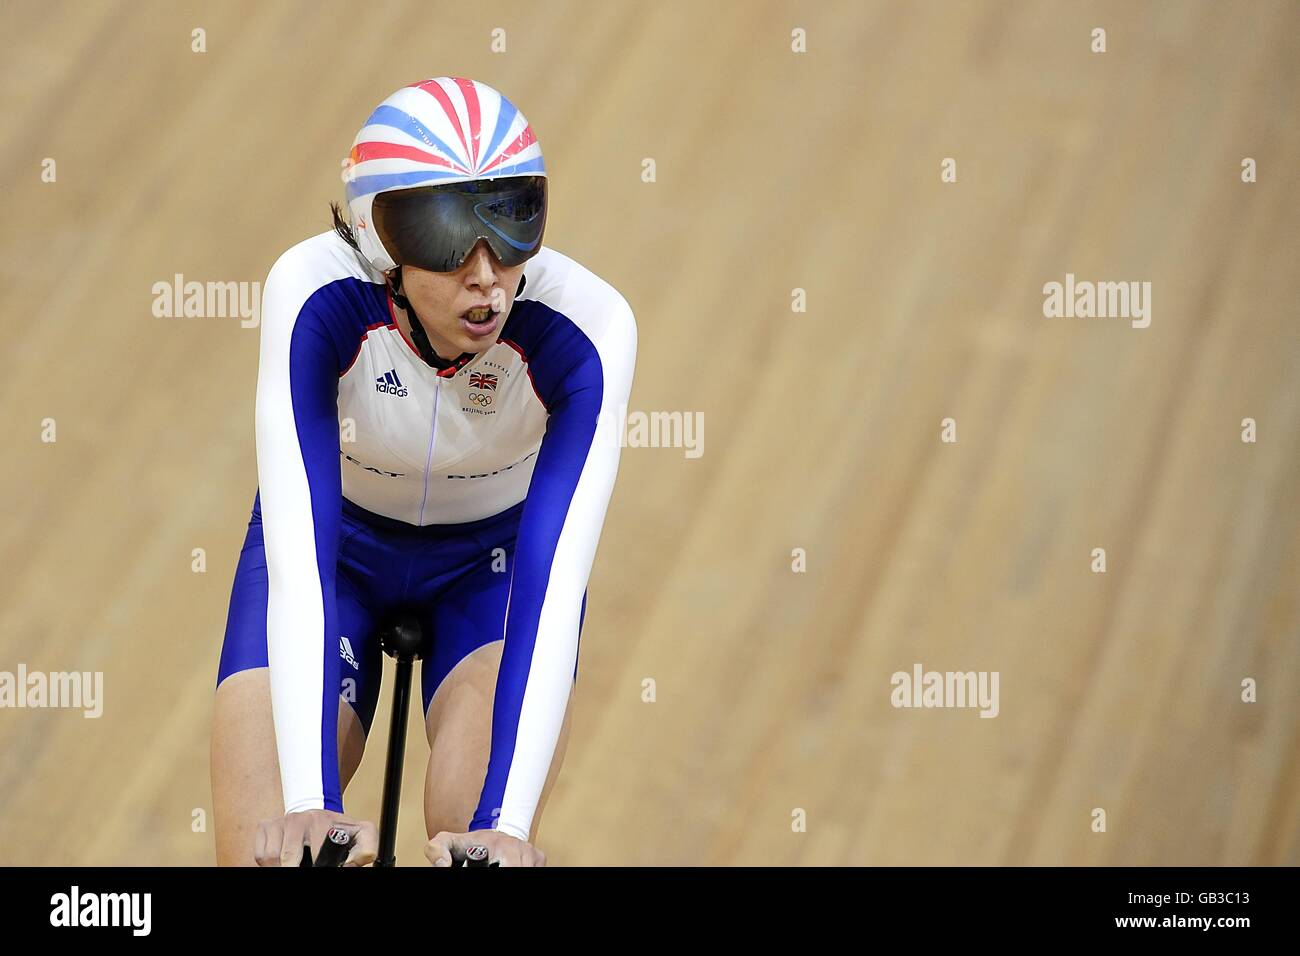 Great Britain's Rebecca Romero competes in the Women's Individual Pursuit Qualifying at the Laoshan Velodrome on day 7 of the 2008 Olympic Games in Beijing. Stock Photo